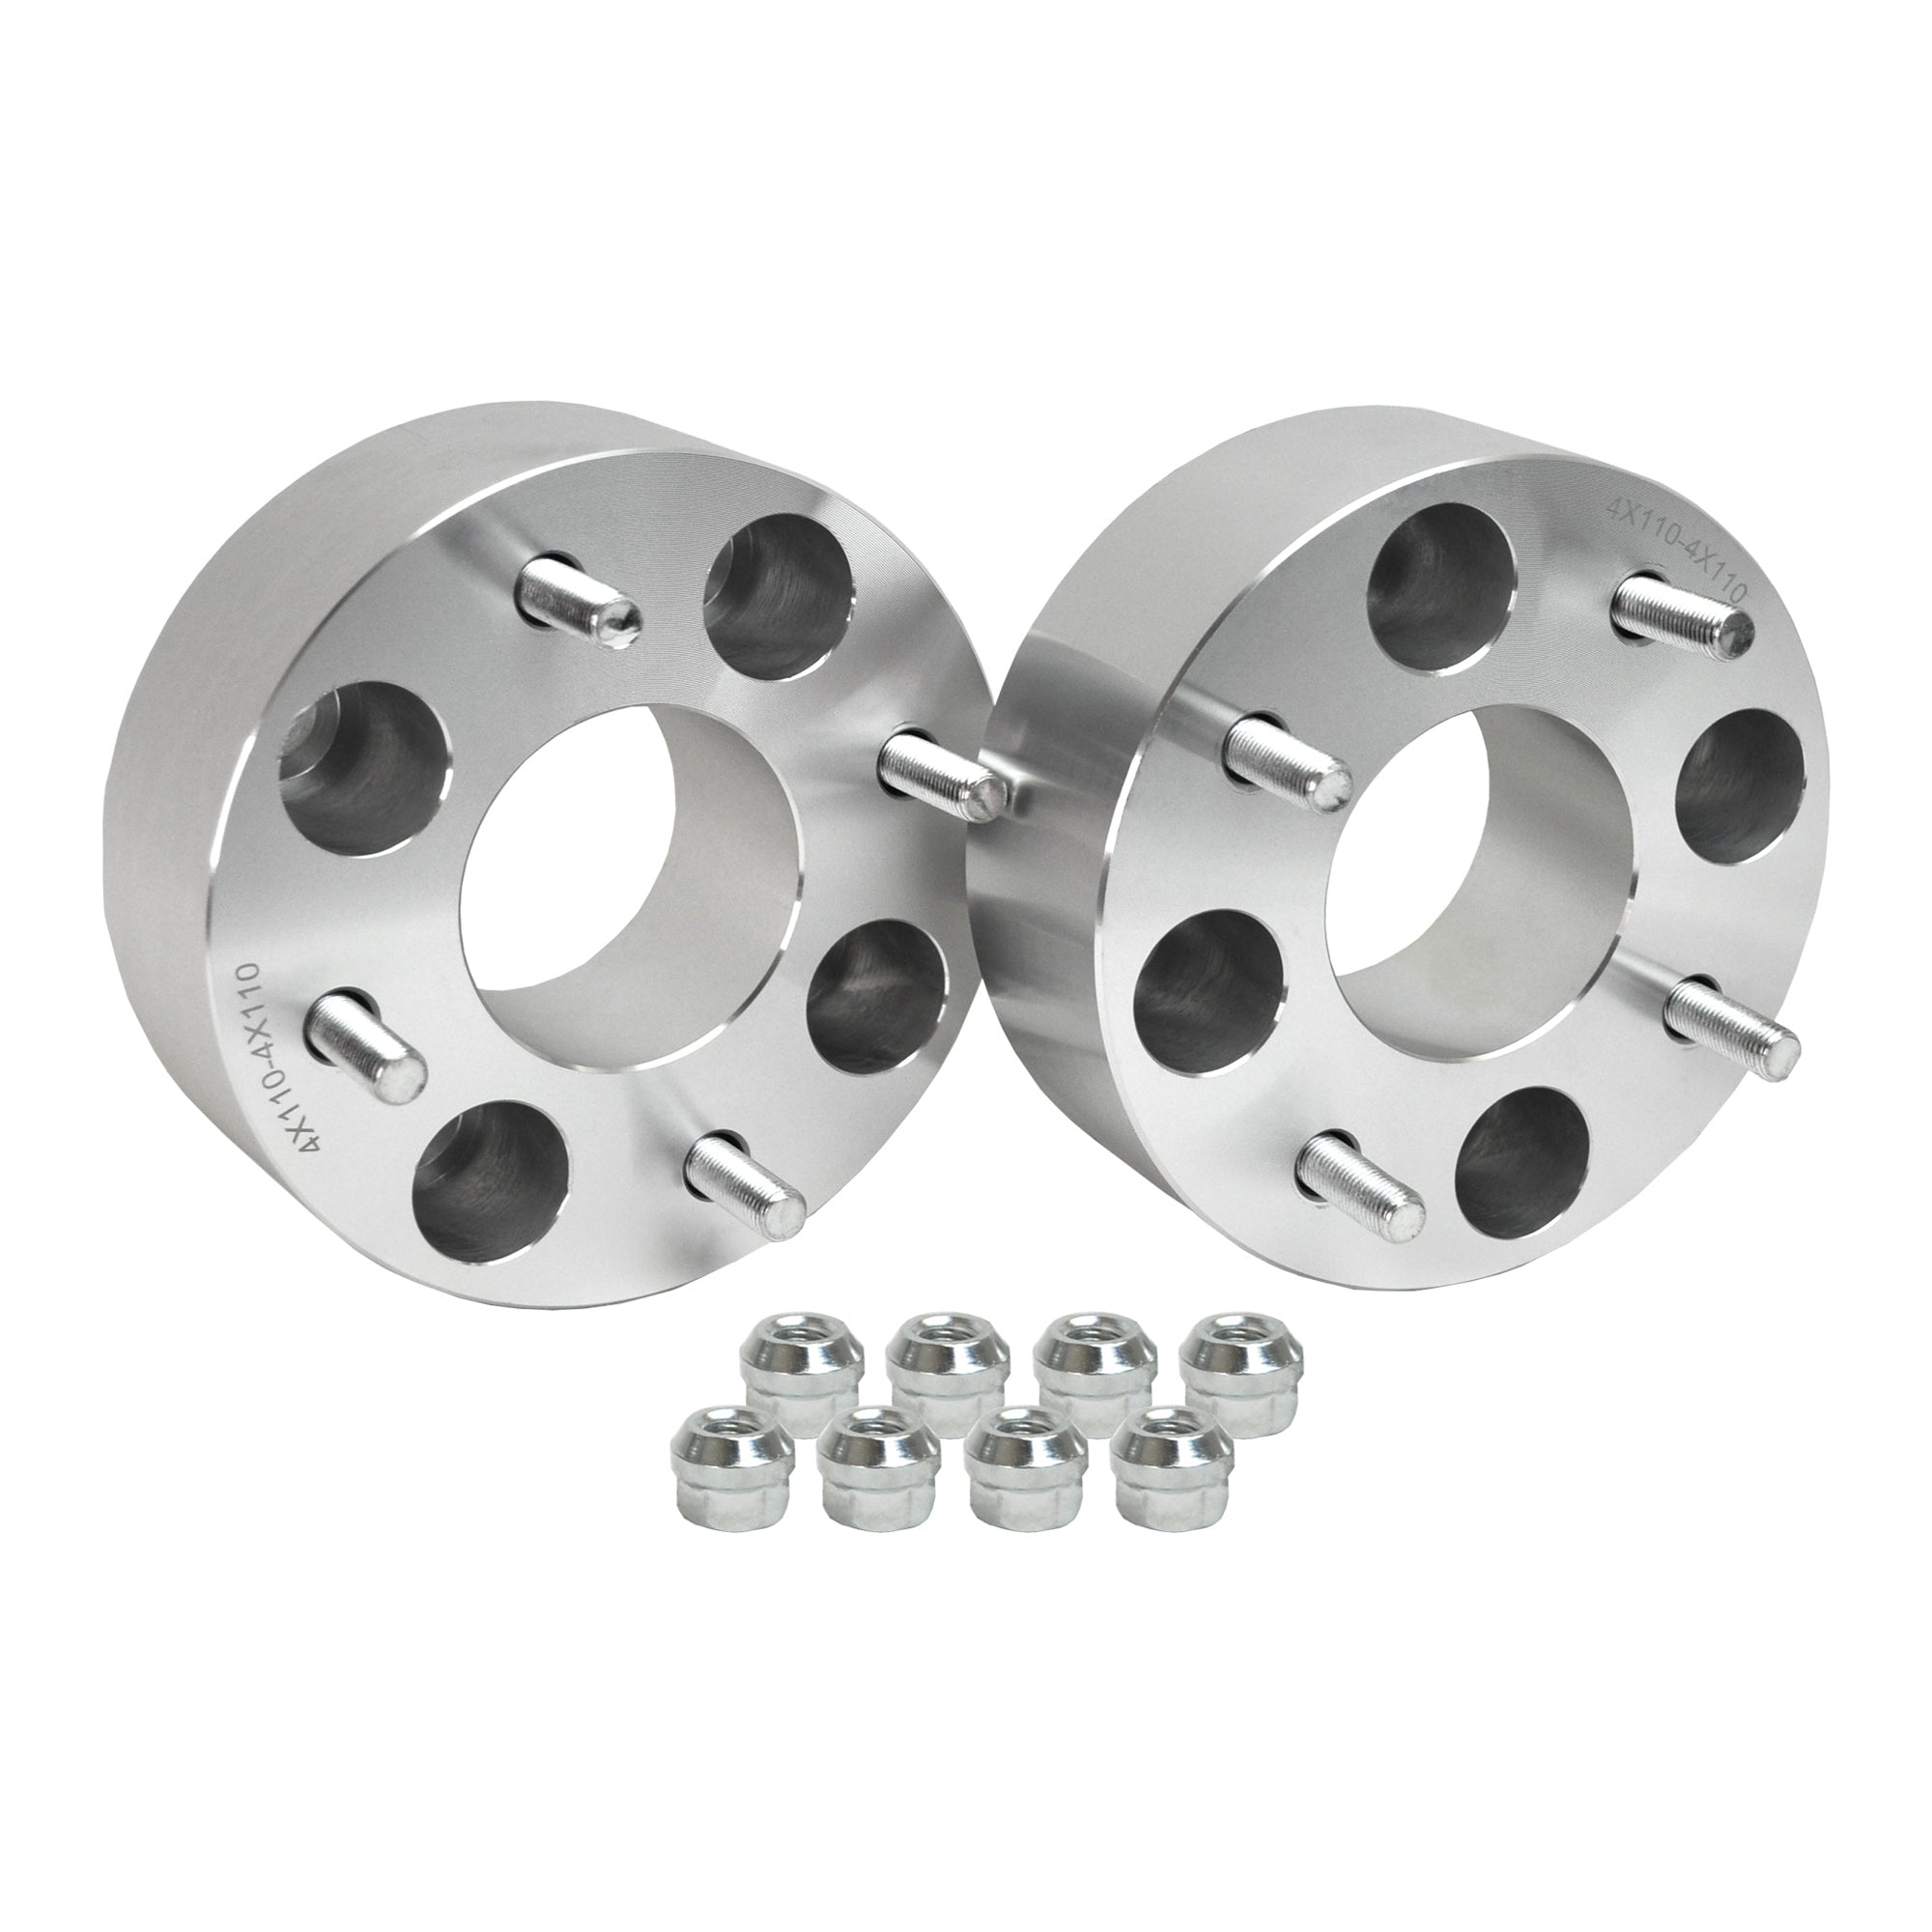 Arctic Cat Prowler 700 Rugged Wheel Spacer